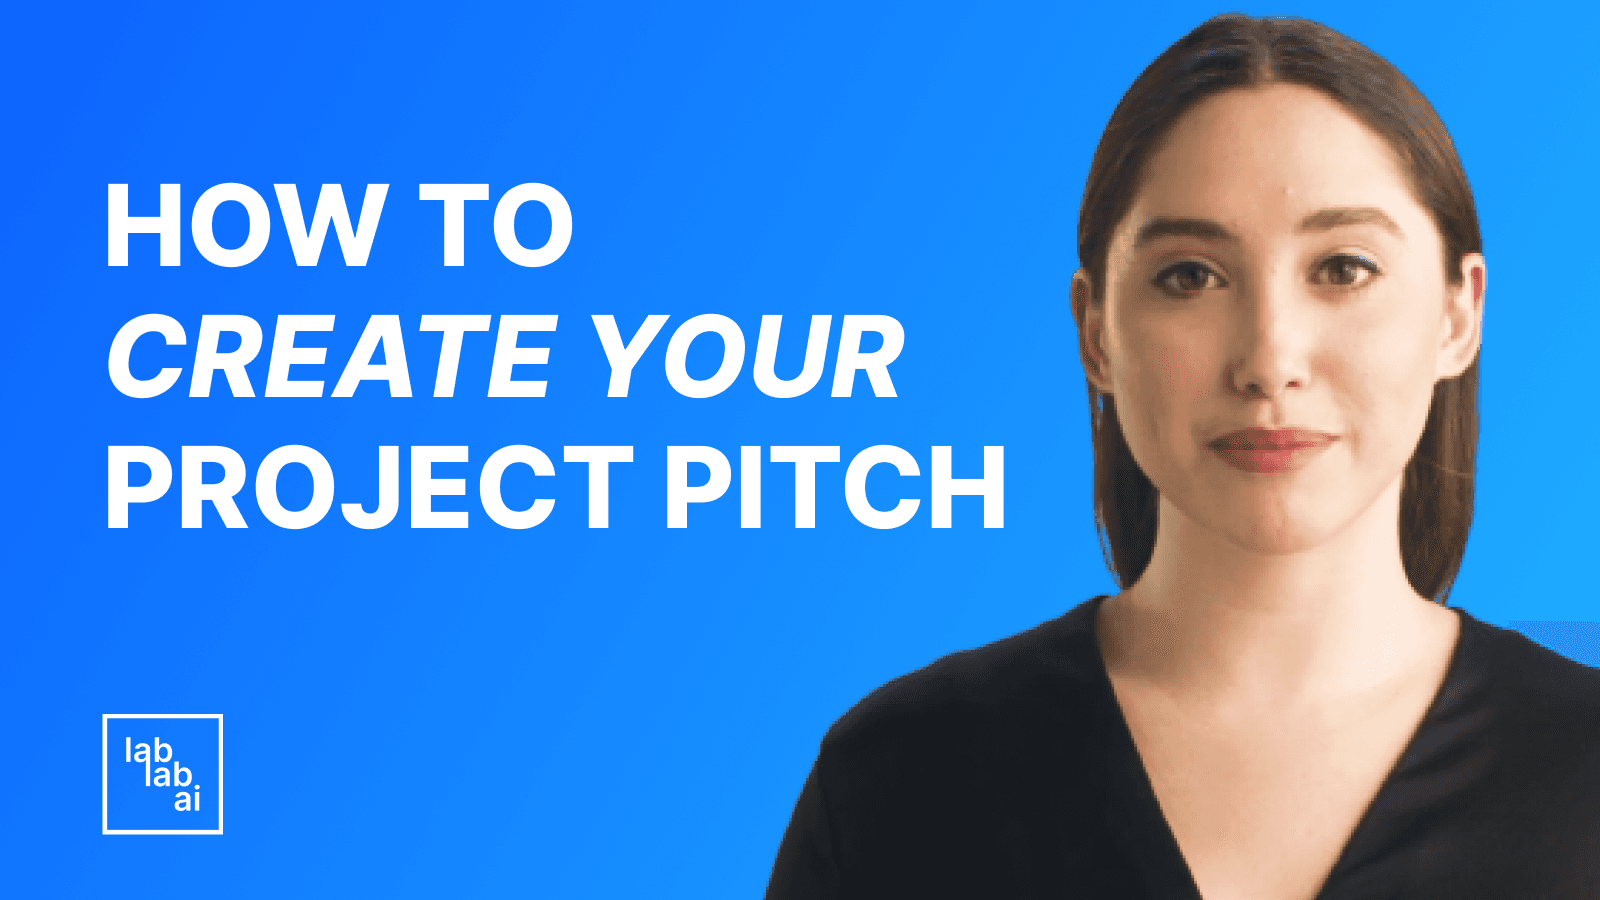 Guidelines for Creating a Project Pitch